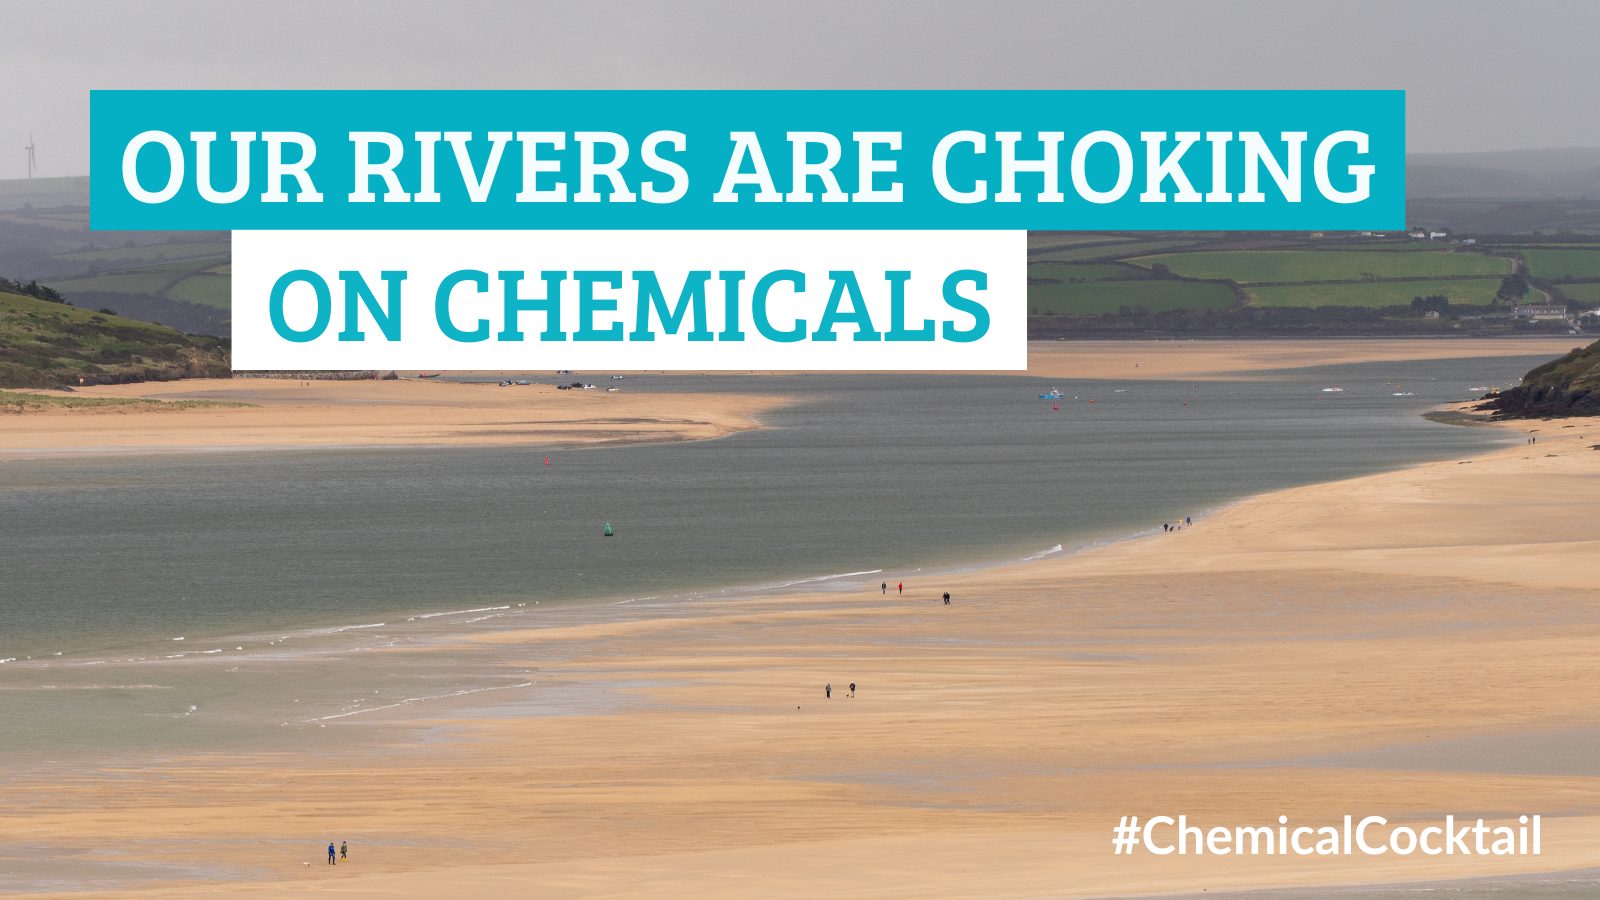 Our rivers are choking on chemicals